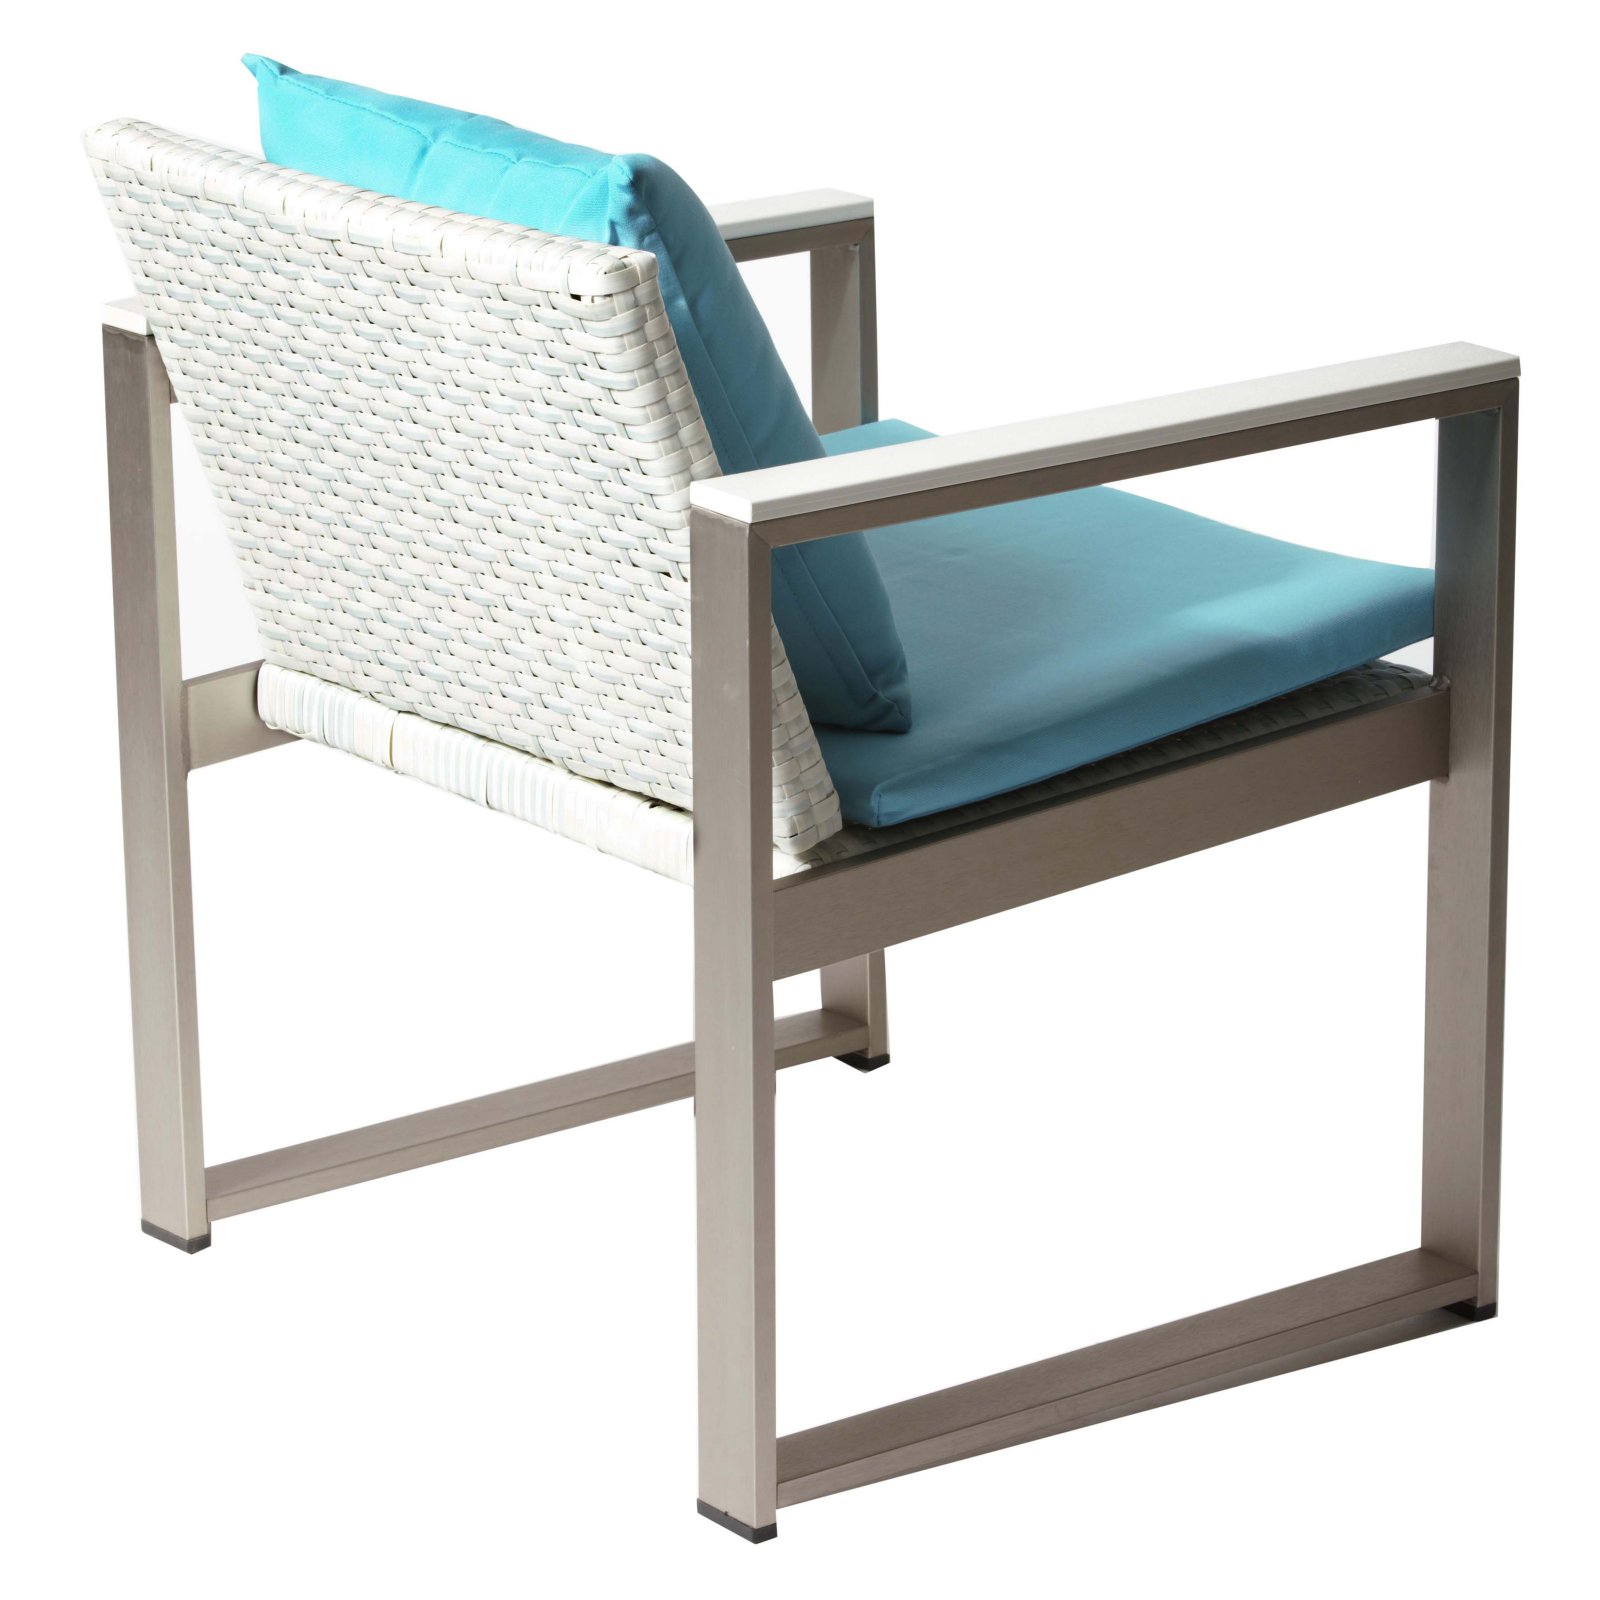 Pangea Home Chester Patio Lounge Chair - image 5 of 11